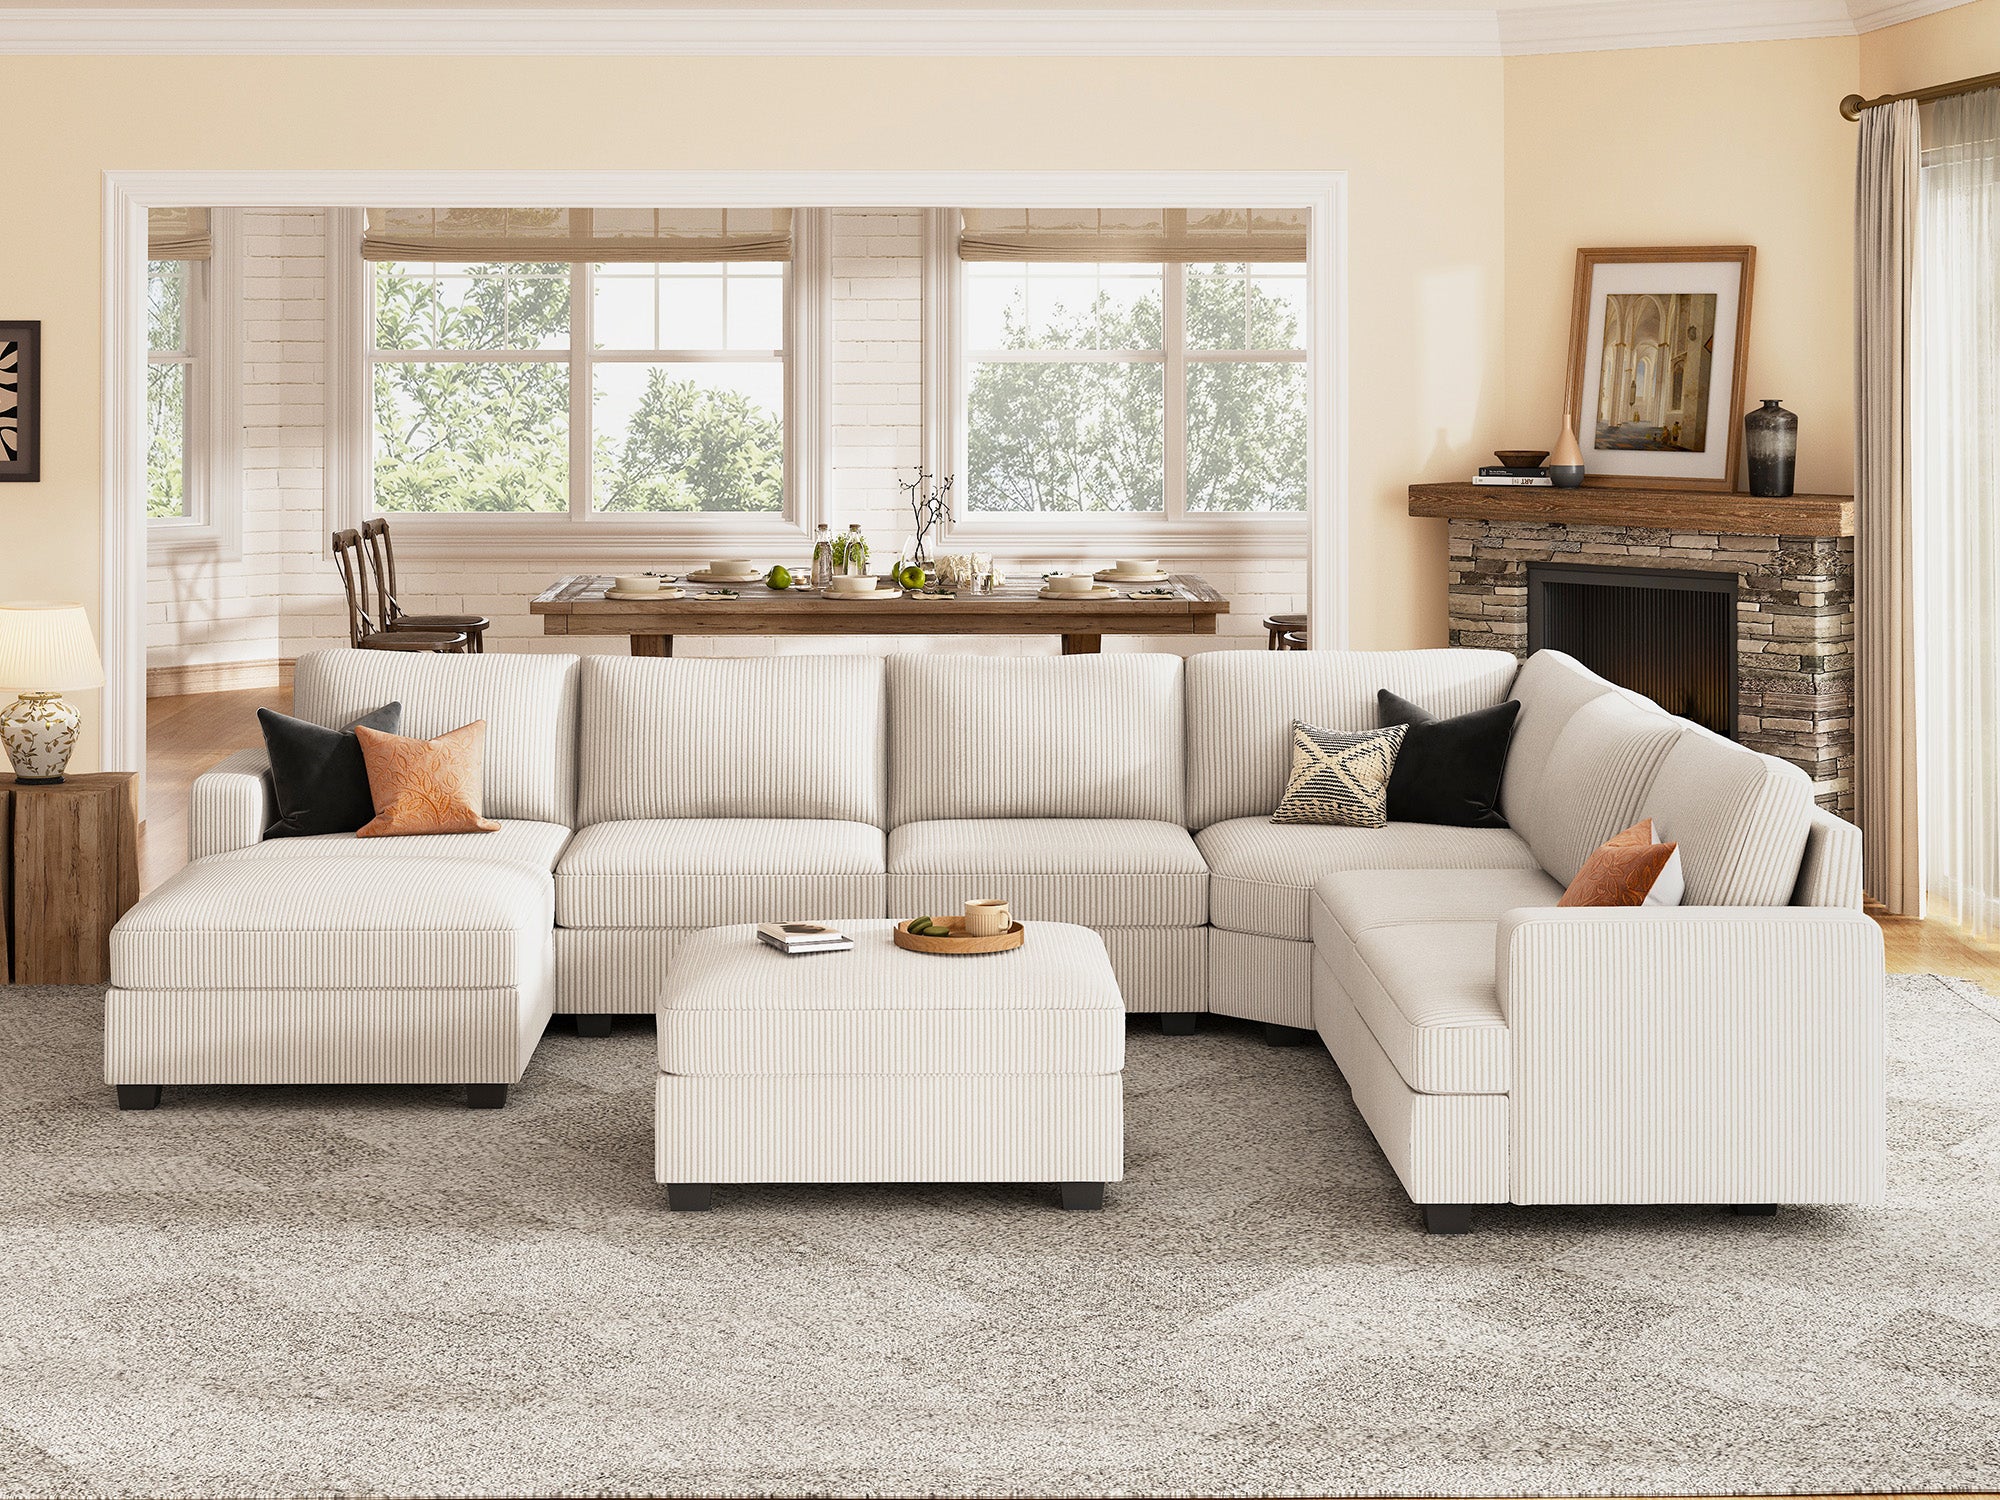 HONBAY 8 Piece Modular Sectional With Storage Ottoman #Color_Corduroy Beige